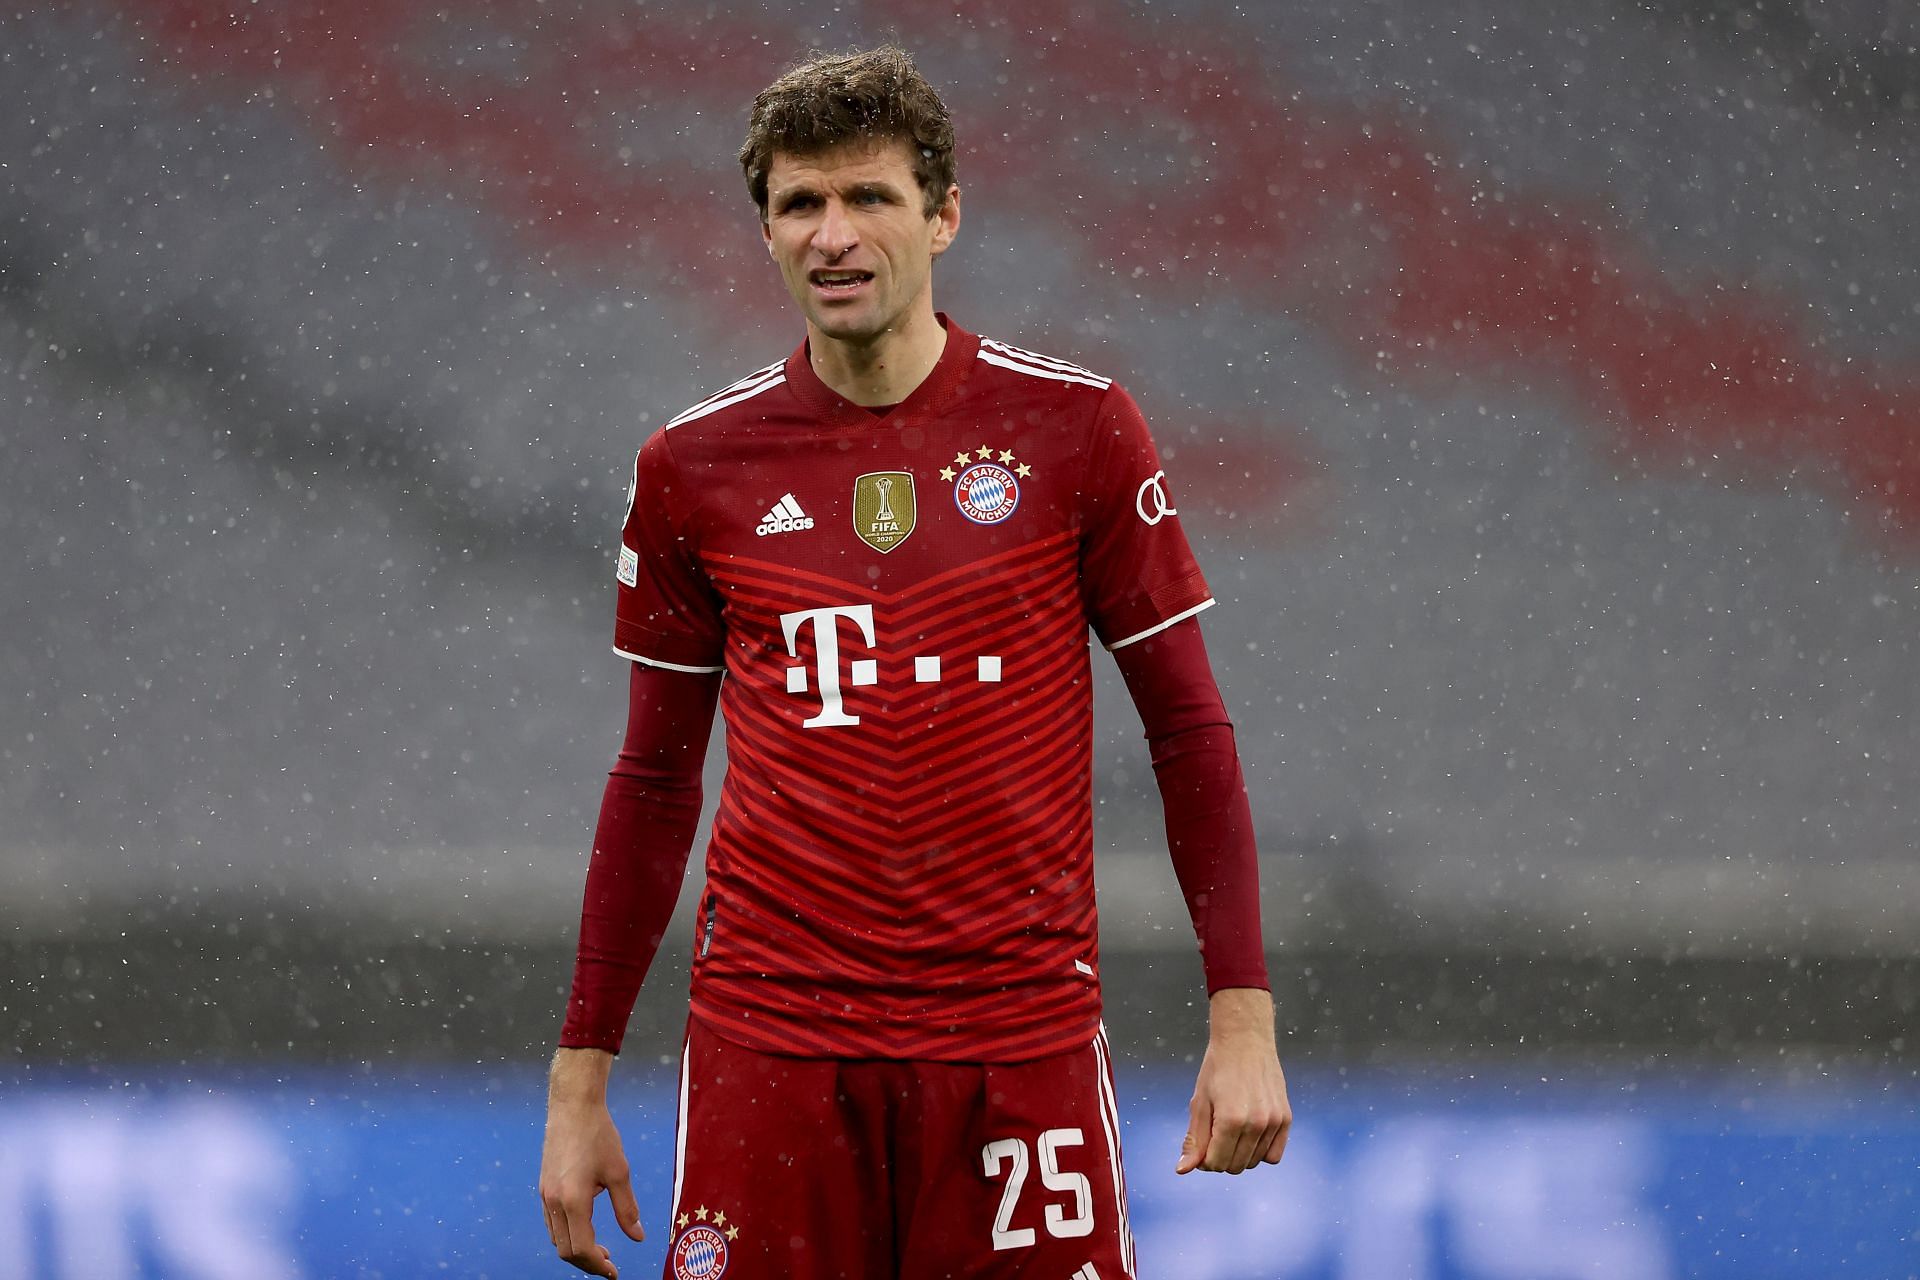 Thomas Muller has ended as the top assist provider in Bundesliga for the last two seasons